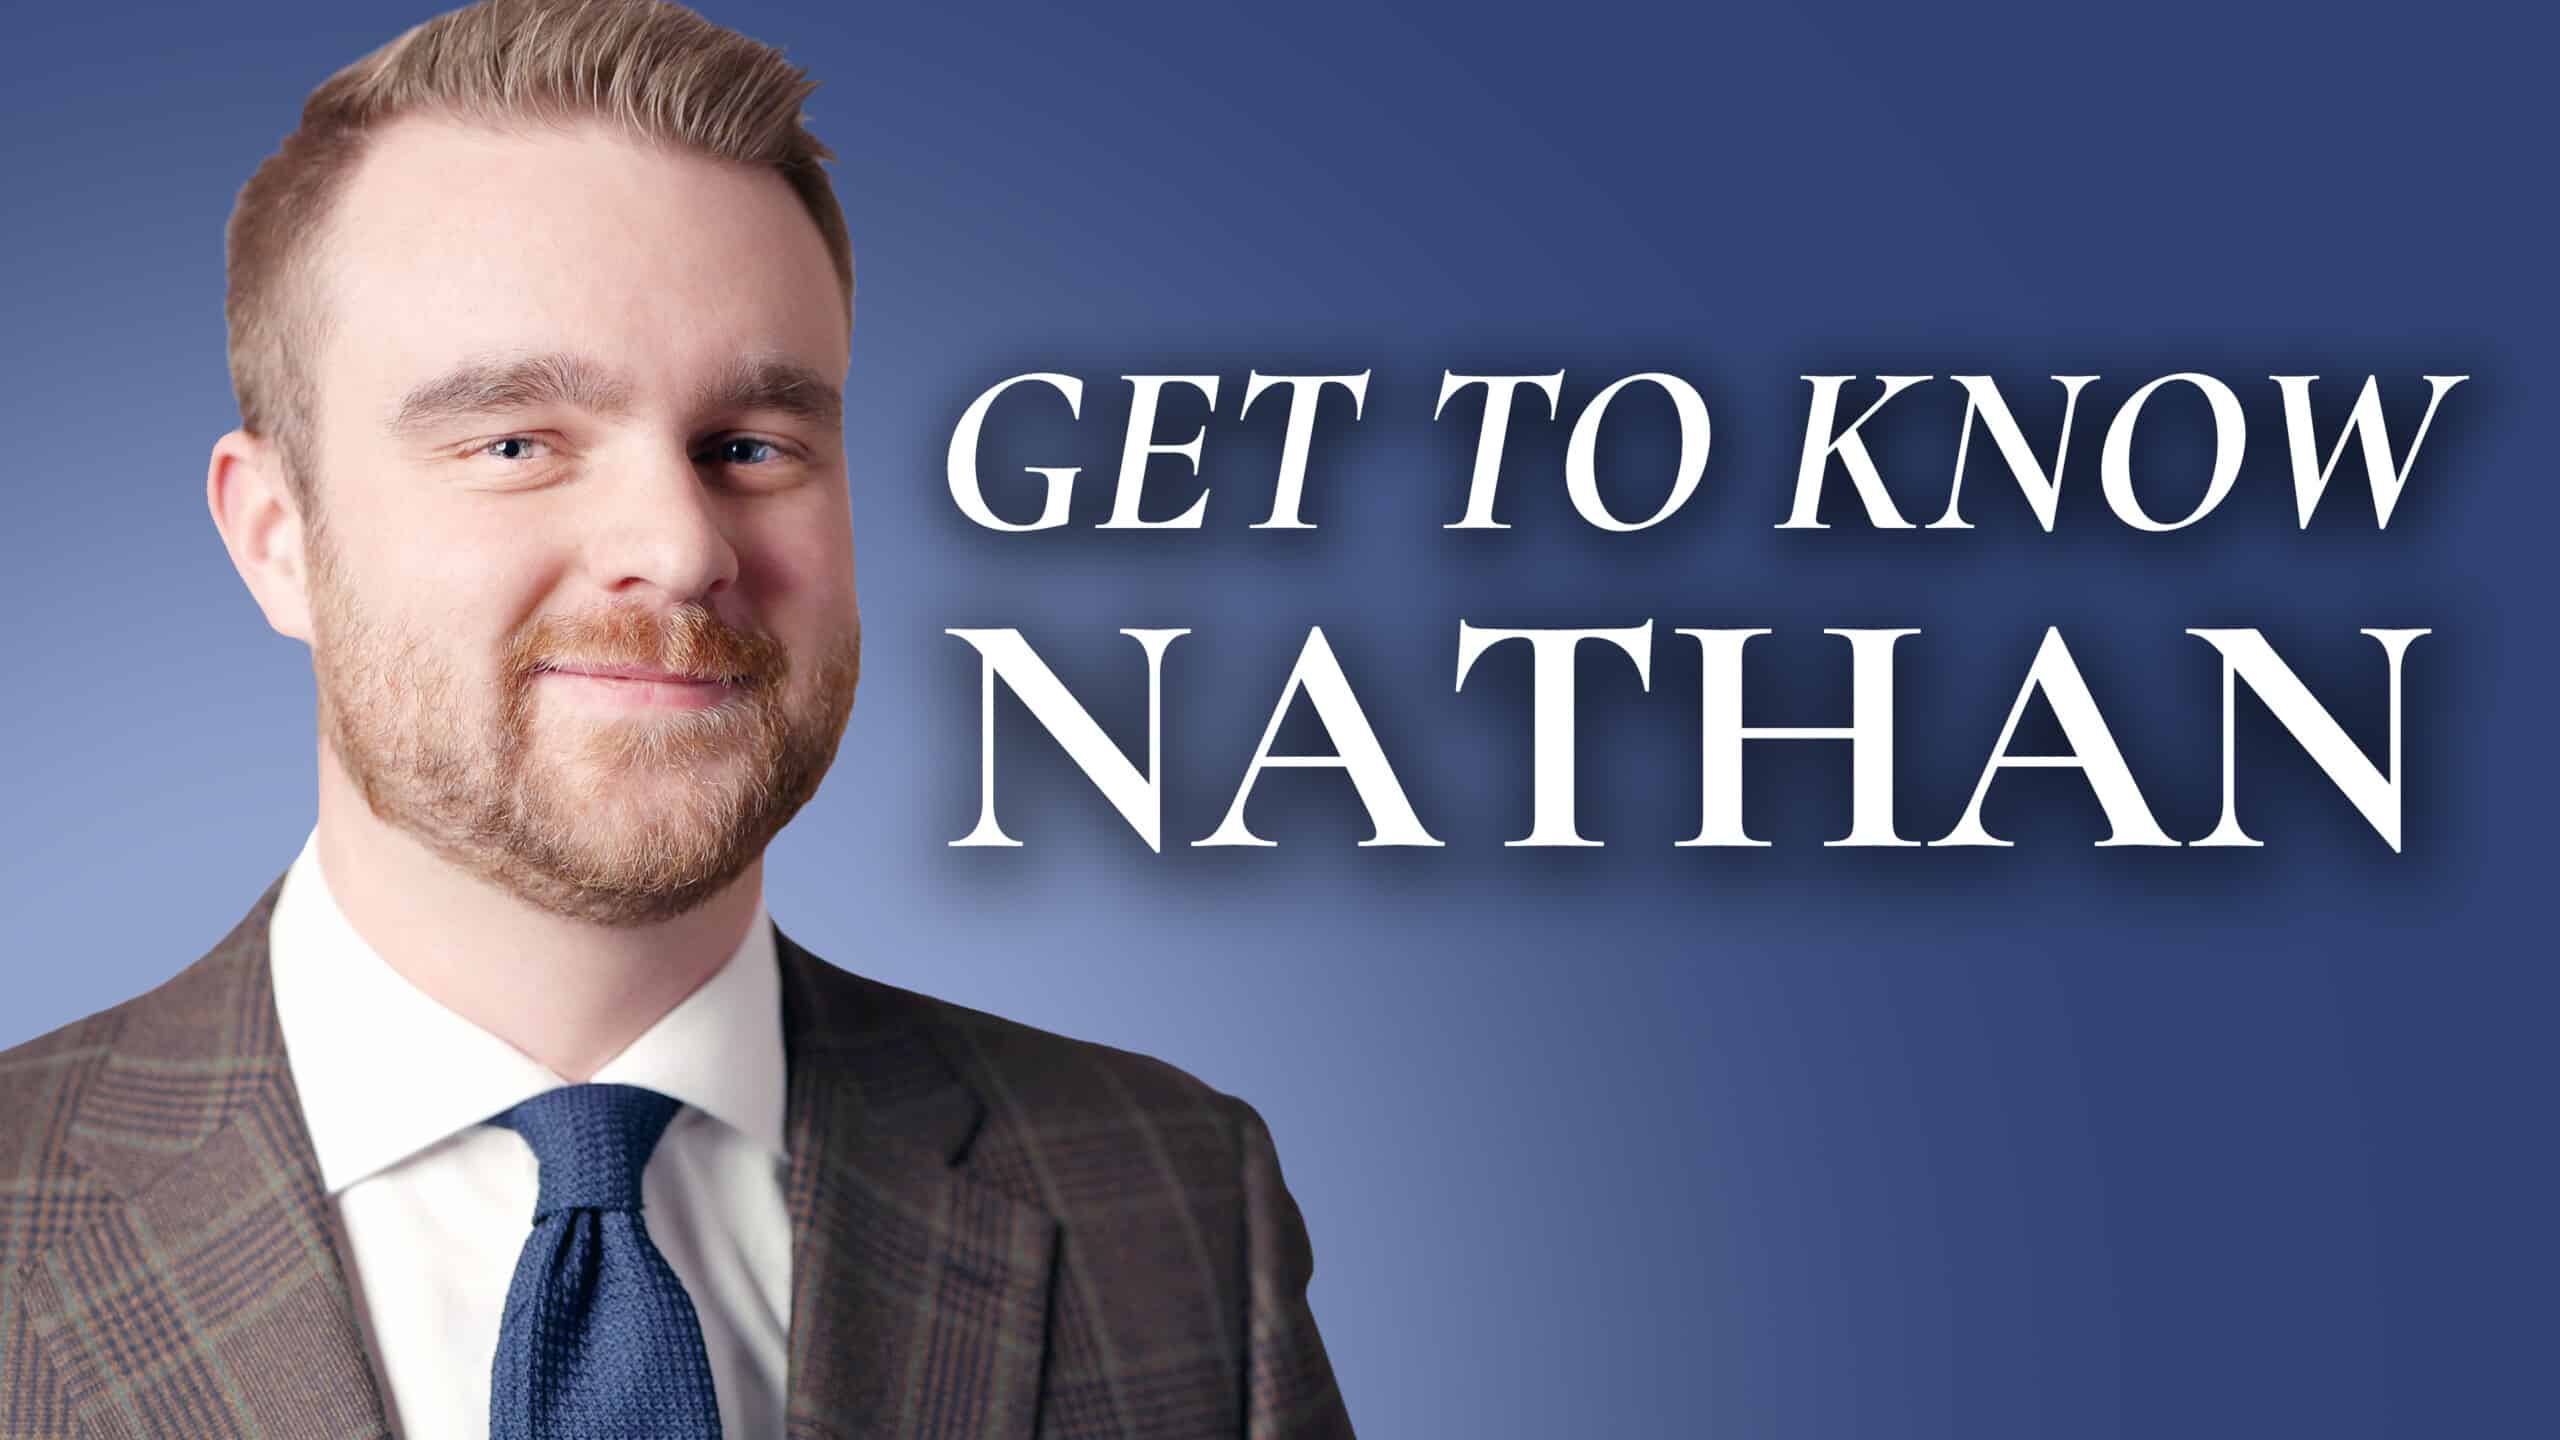 Get To Know Nathan 3840x2160 scaled